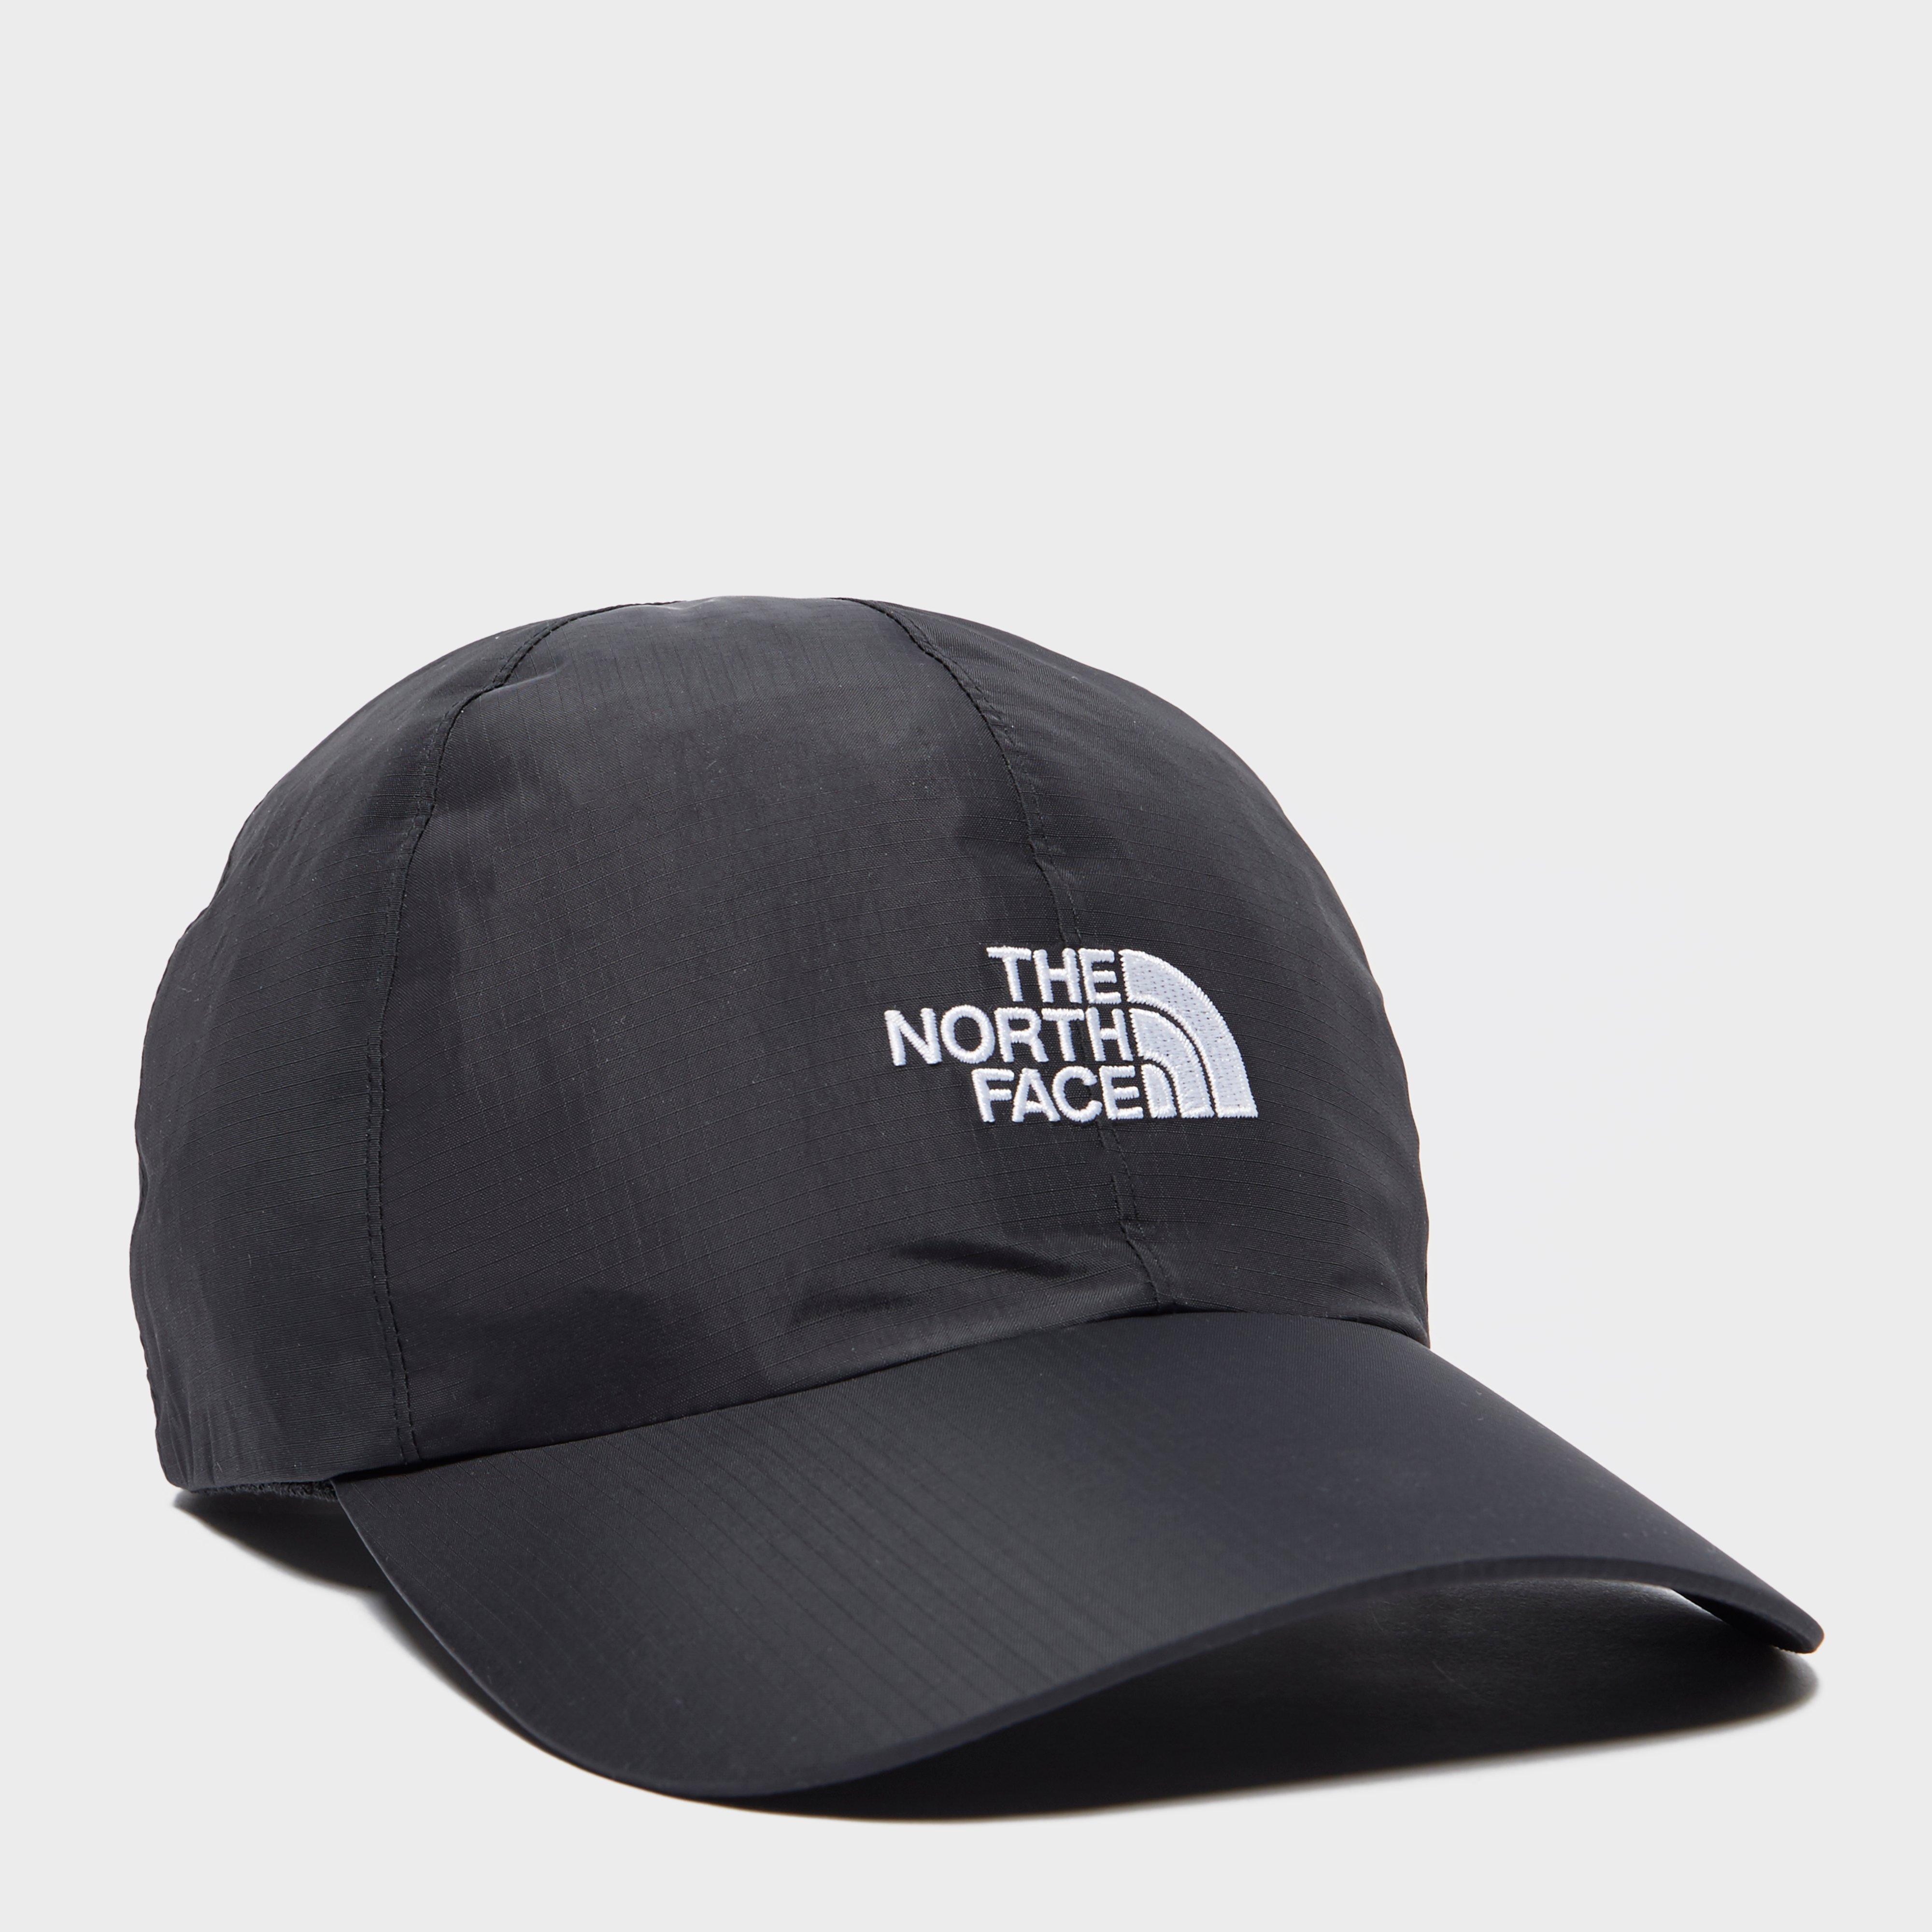 The North Face Dryvent Logo Cap | Millets